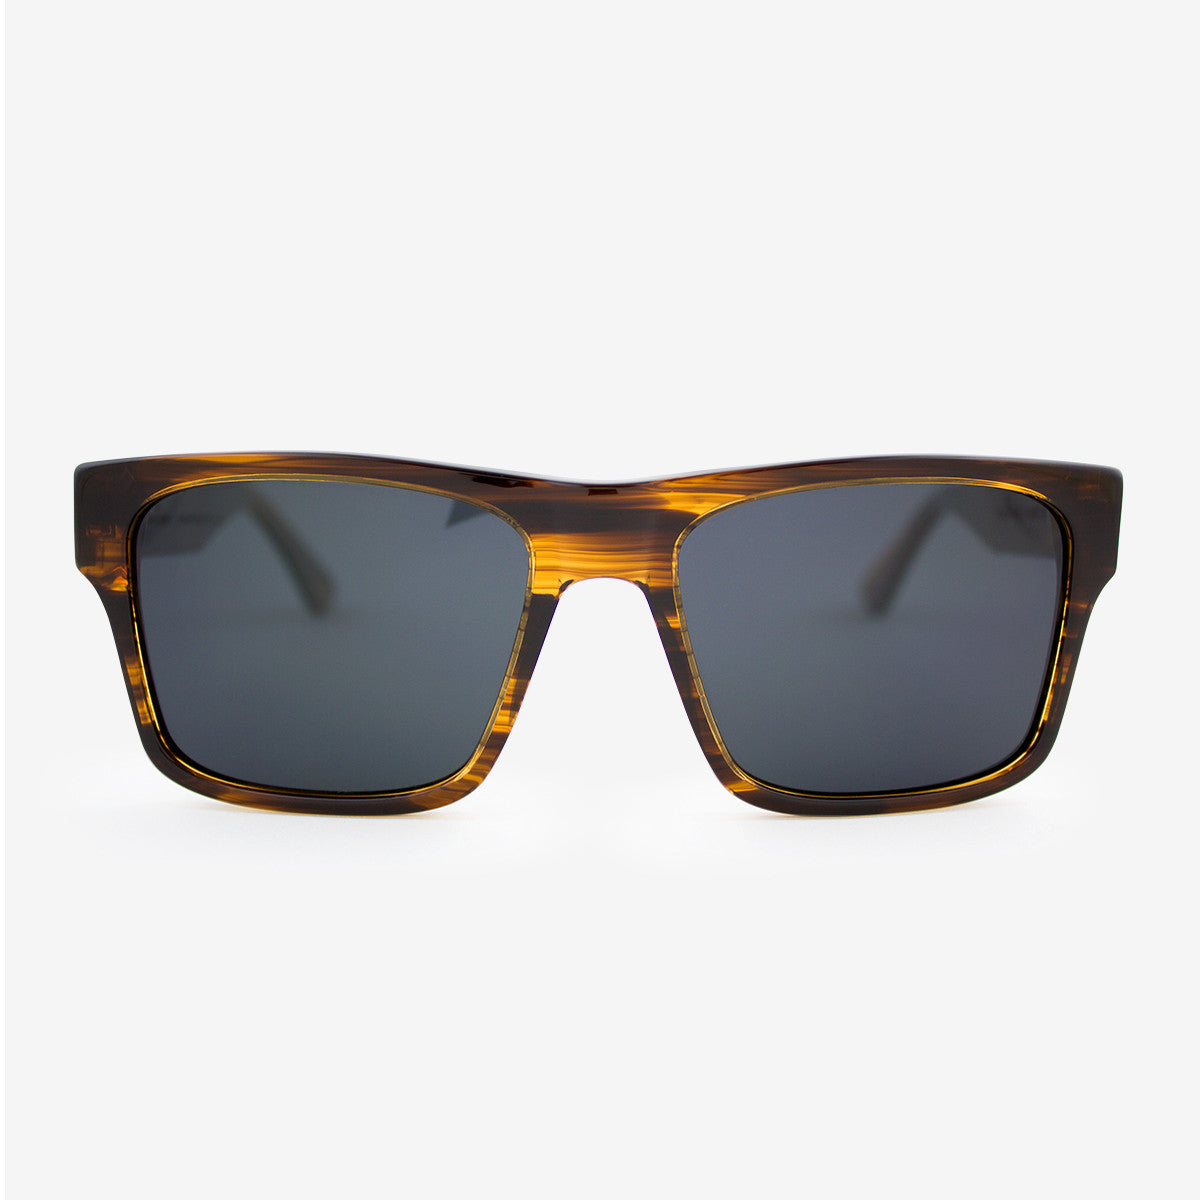 Sebastian streaming light acetate and wood sunglasses with walnut temples